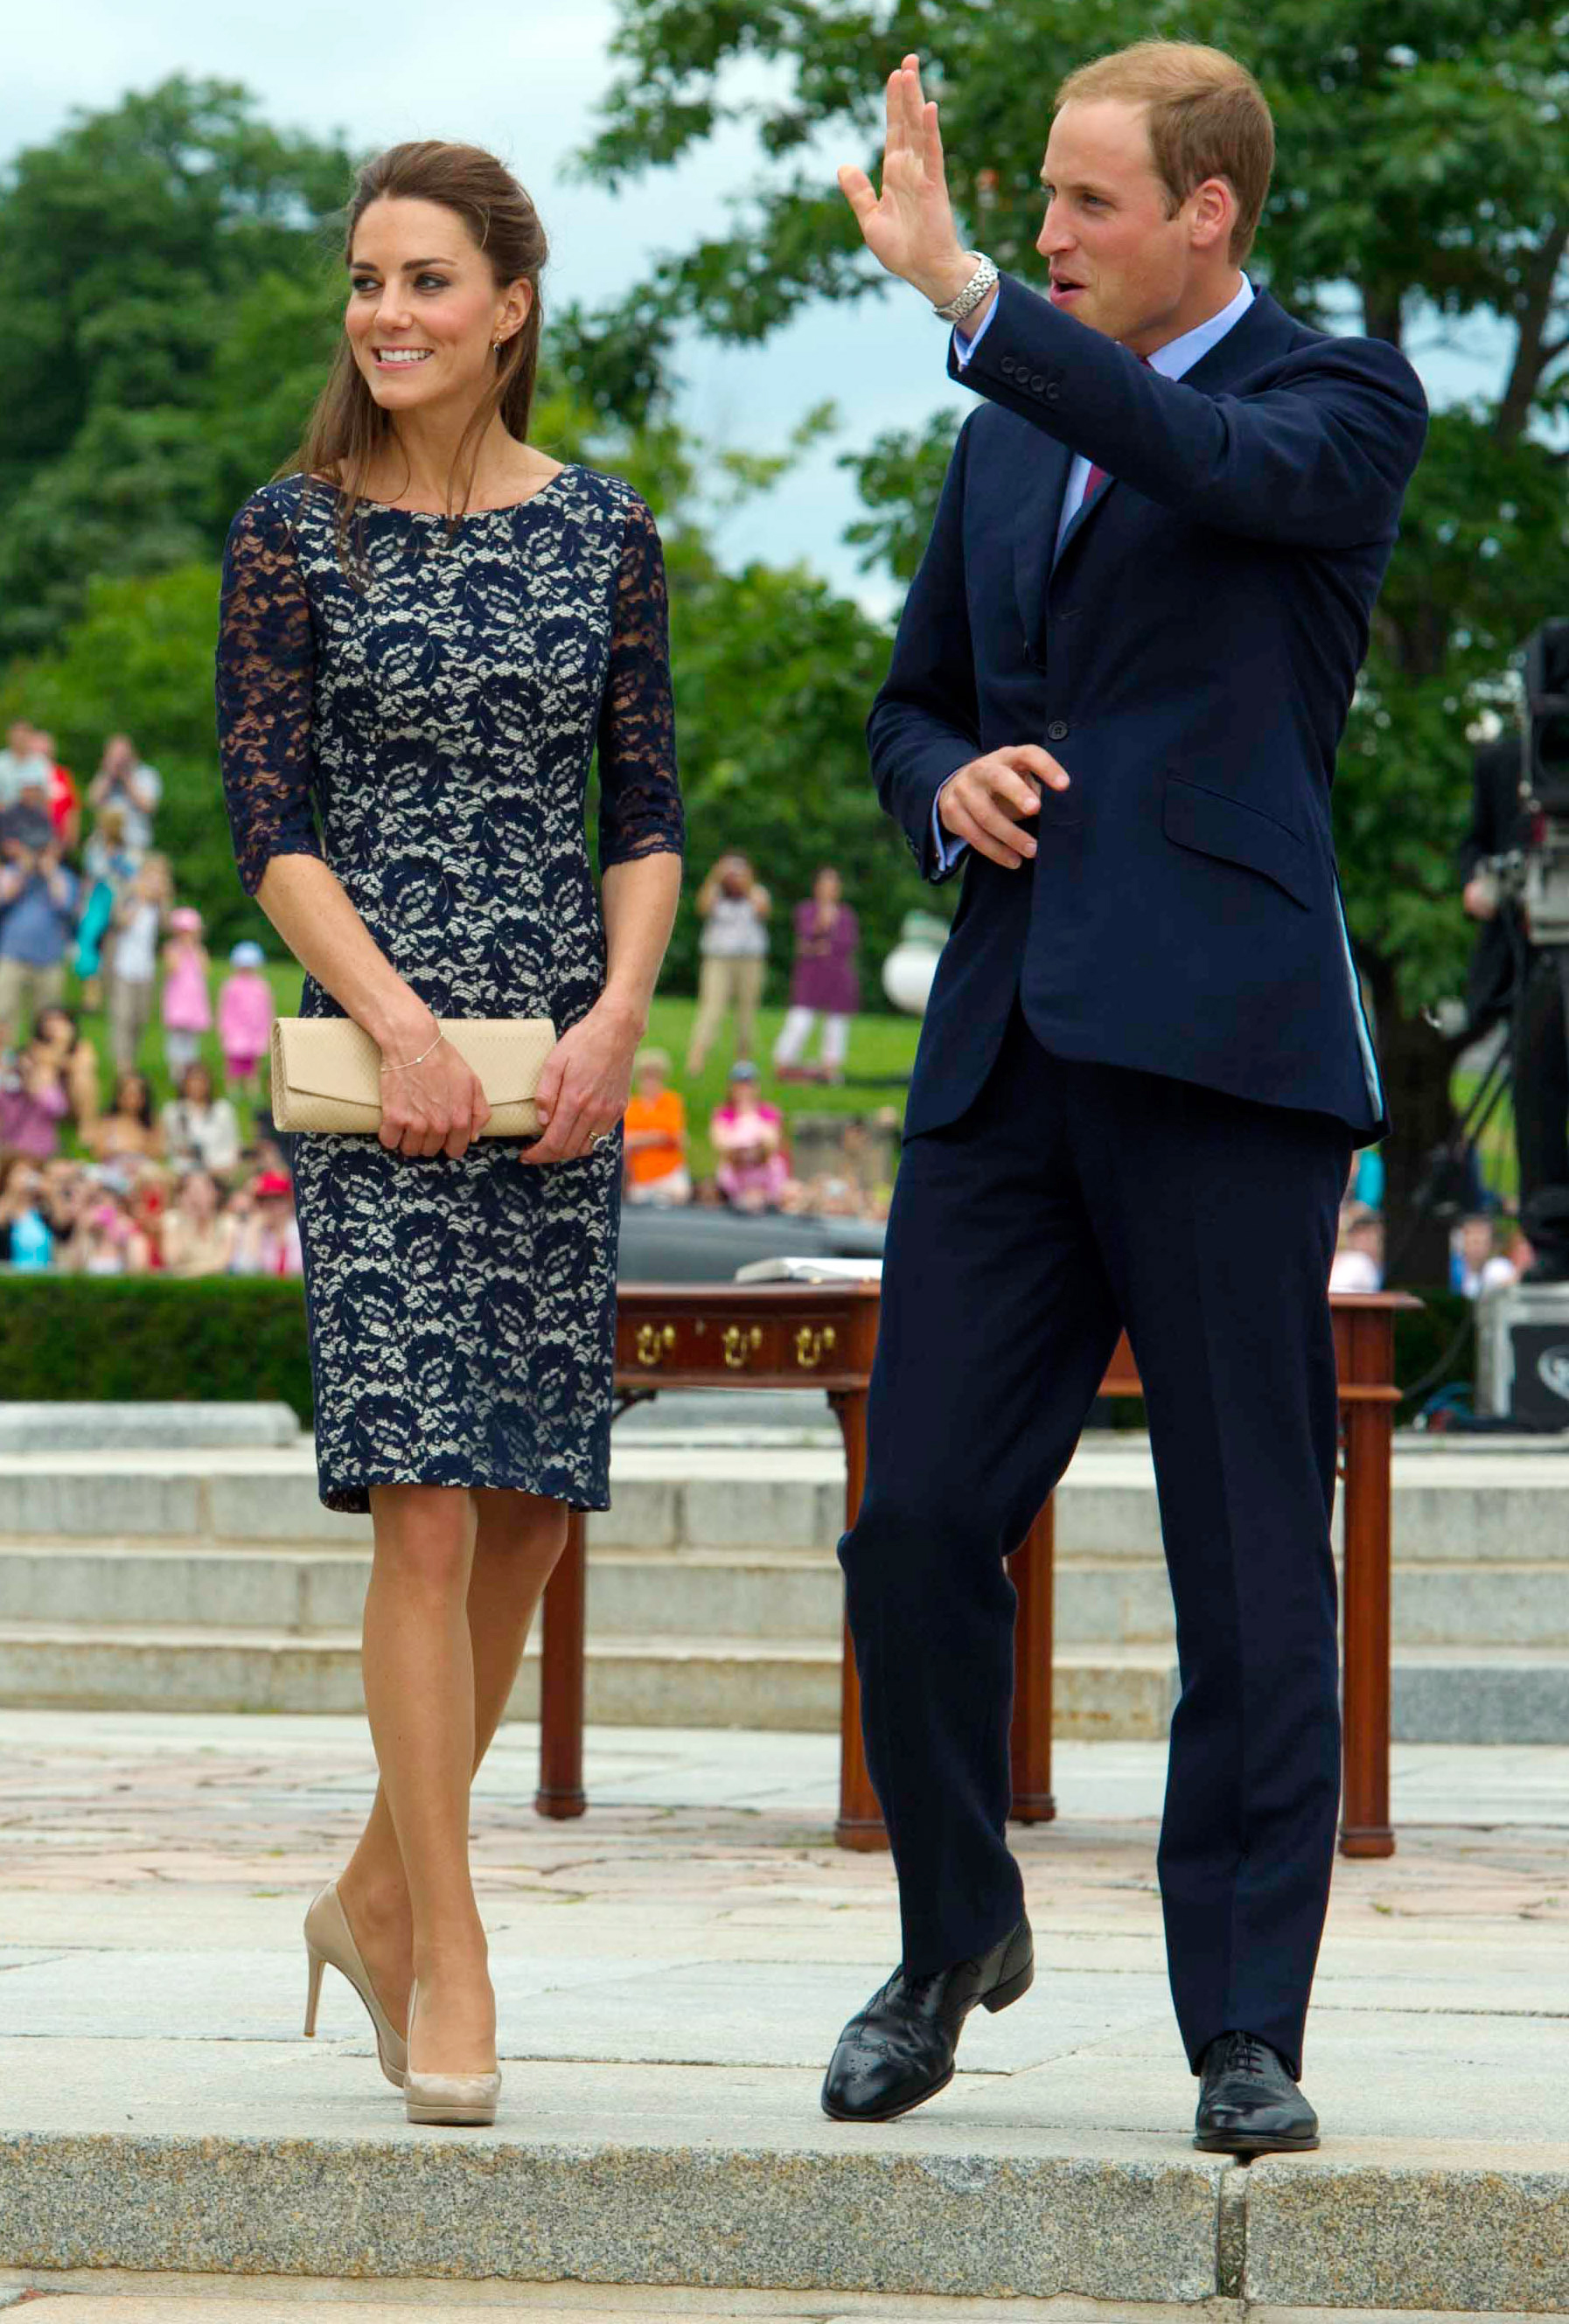 Get the look: Duchess Kate's lace dress